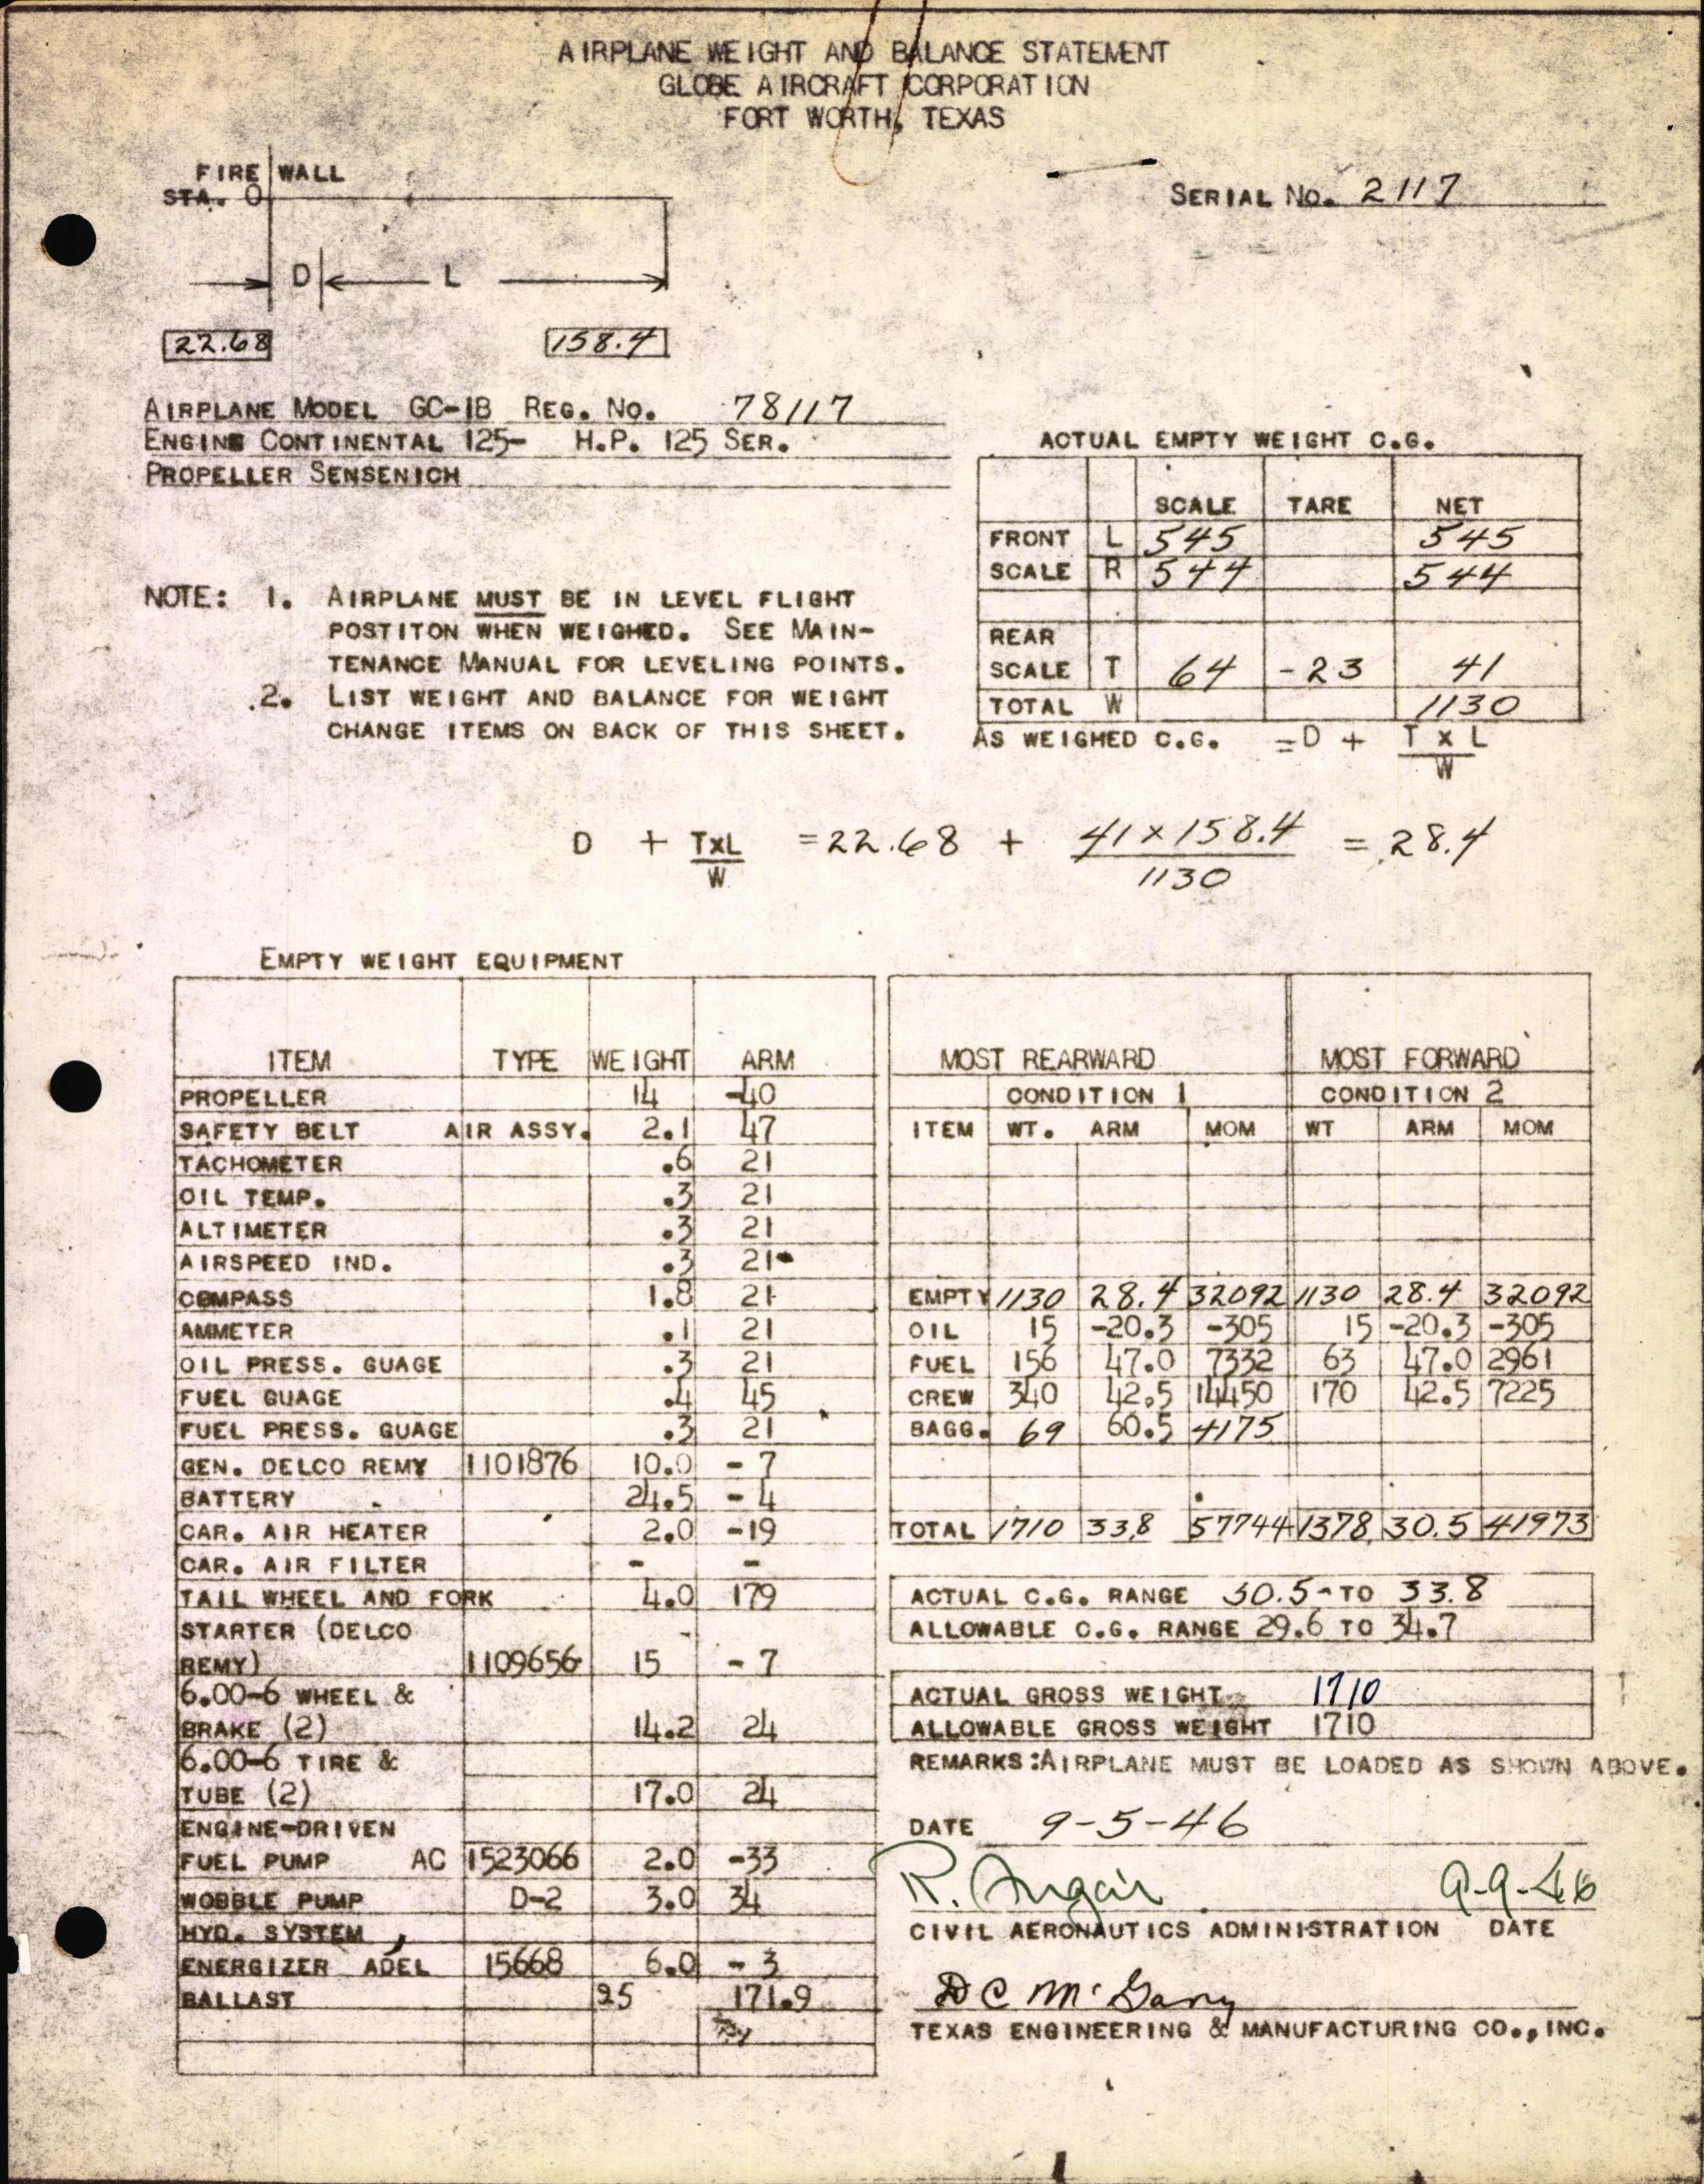 Sample page 1 from AirCorps Library document: Technical Information for Serial Number 2117